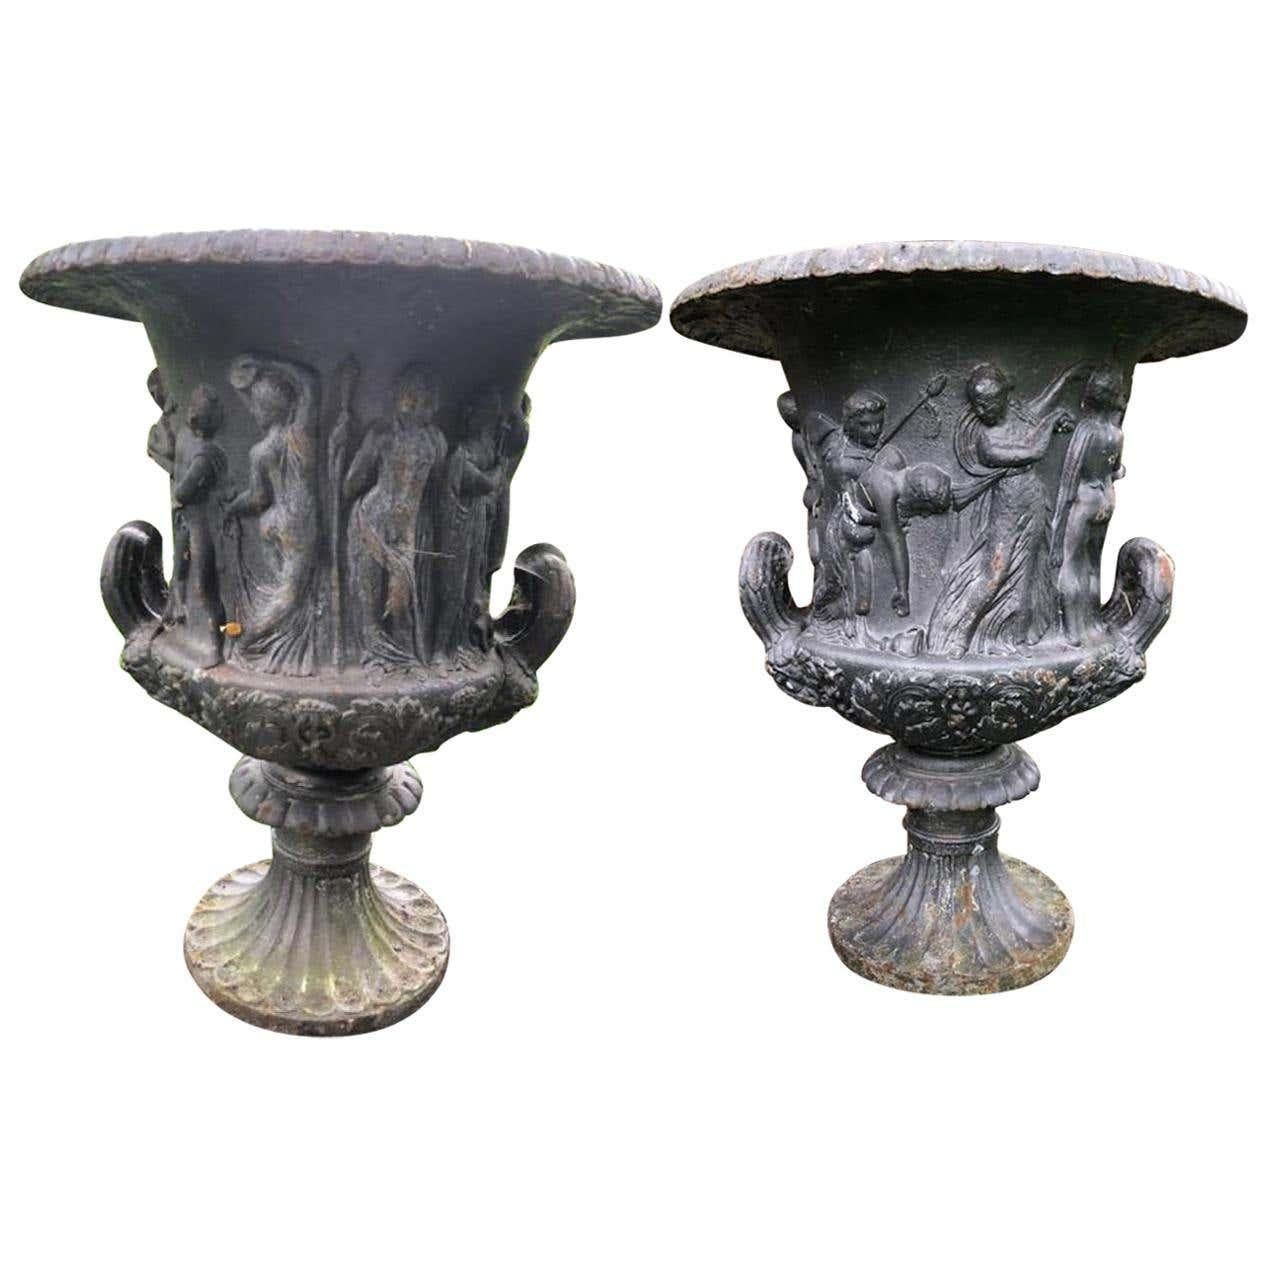 A pair of 19th century weathered cast iron urns after the Medici and Borghese models. Classic egg and dart overhanging rim, above a waisted body cast in relief with a continuous scene of mythological figures, the acanthus lower section flanked to